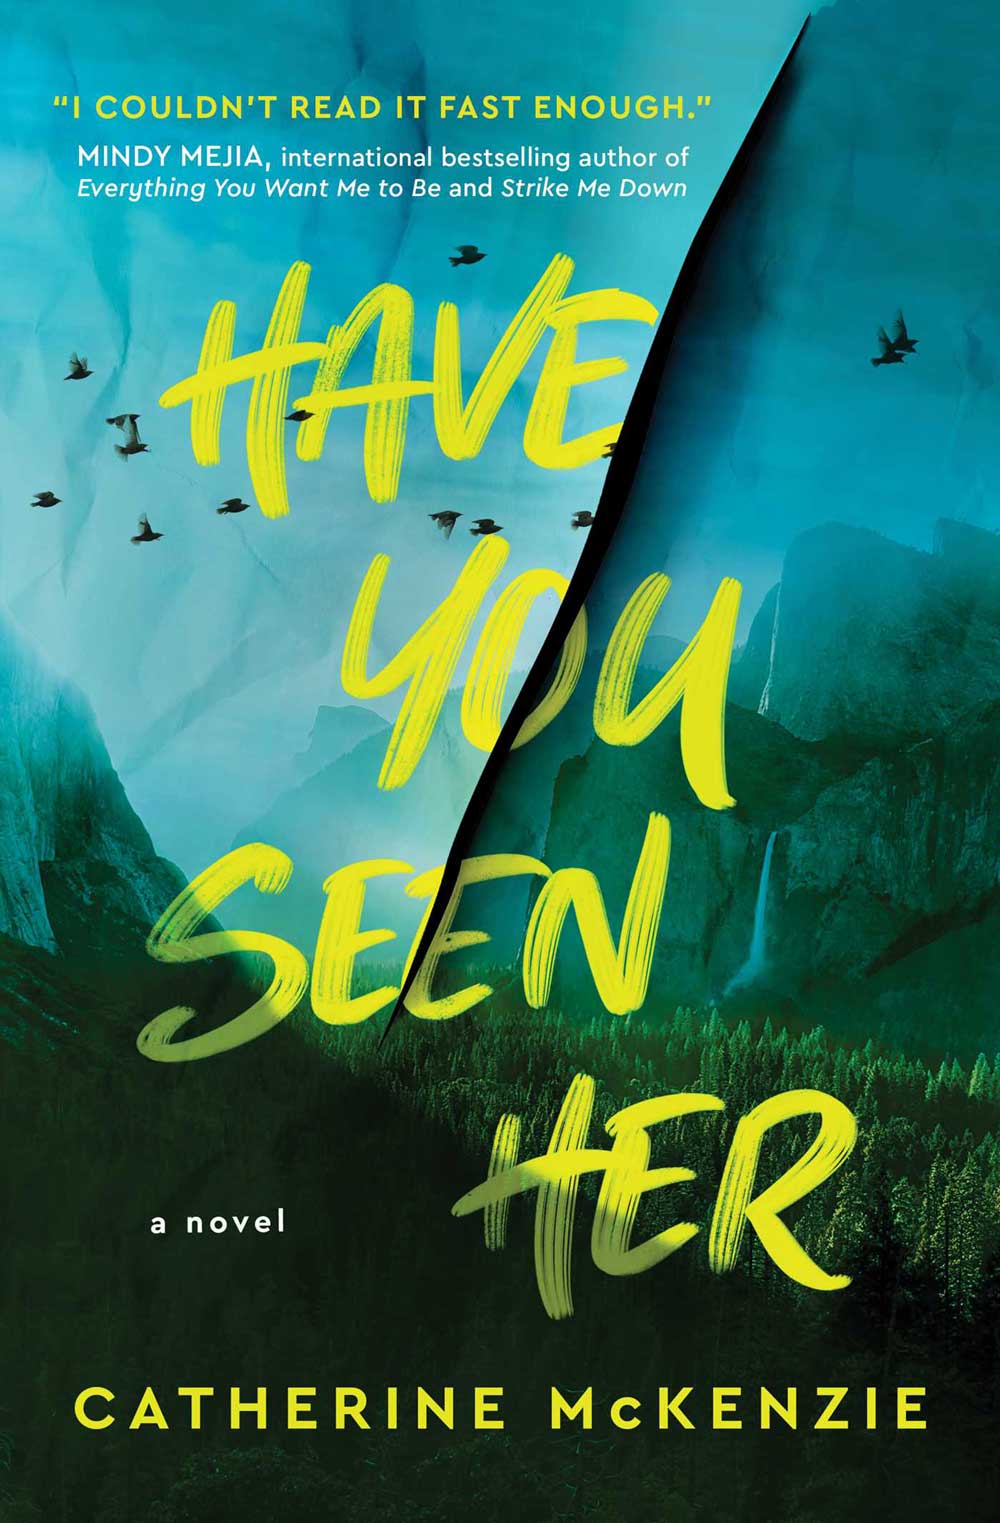 Book cover of Have You Seen Her. A landscape scene of the sky, mountains and trees.